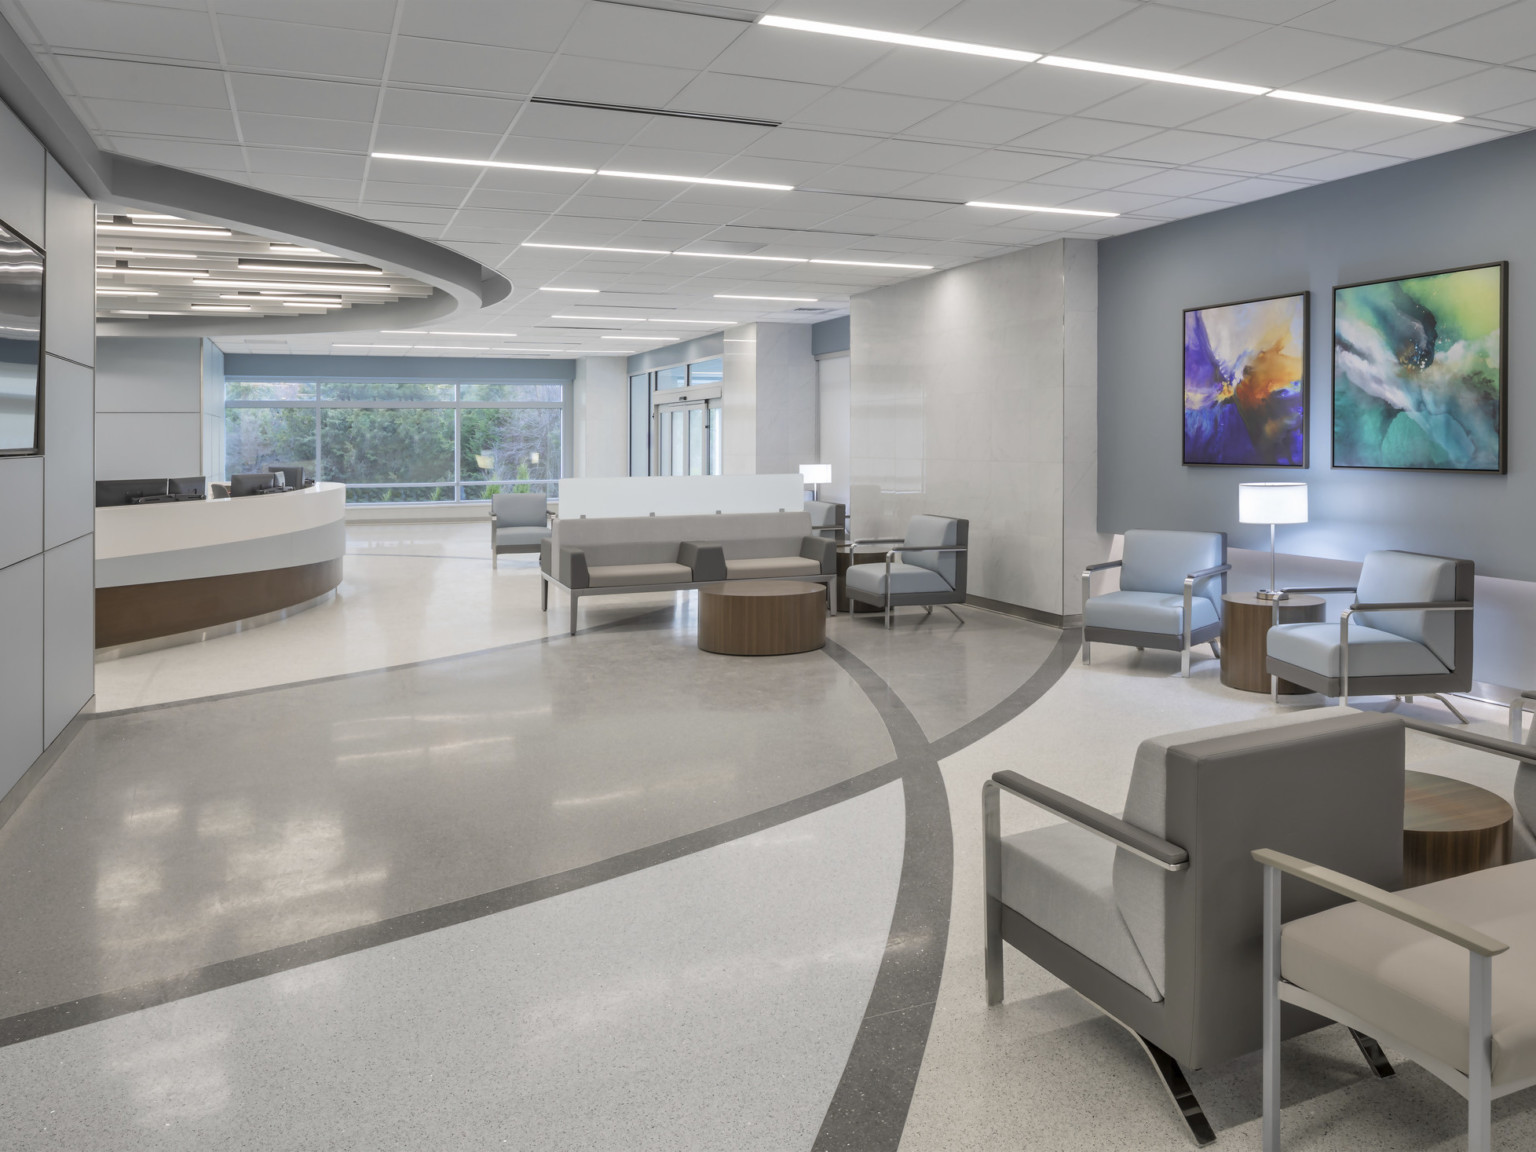 Hospital waiting room lobby with chairs and bench seating. Abstract paintings hang on the grey walls with white accents